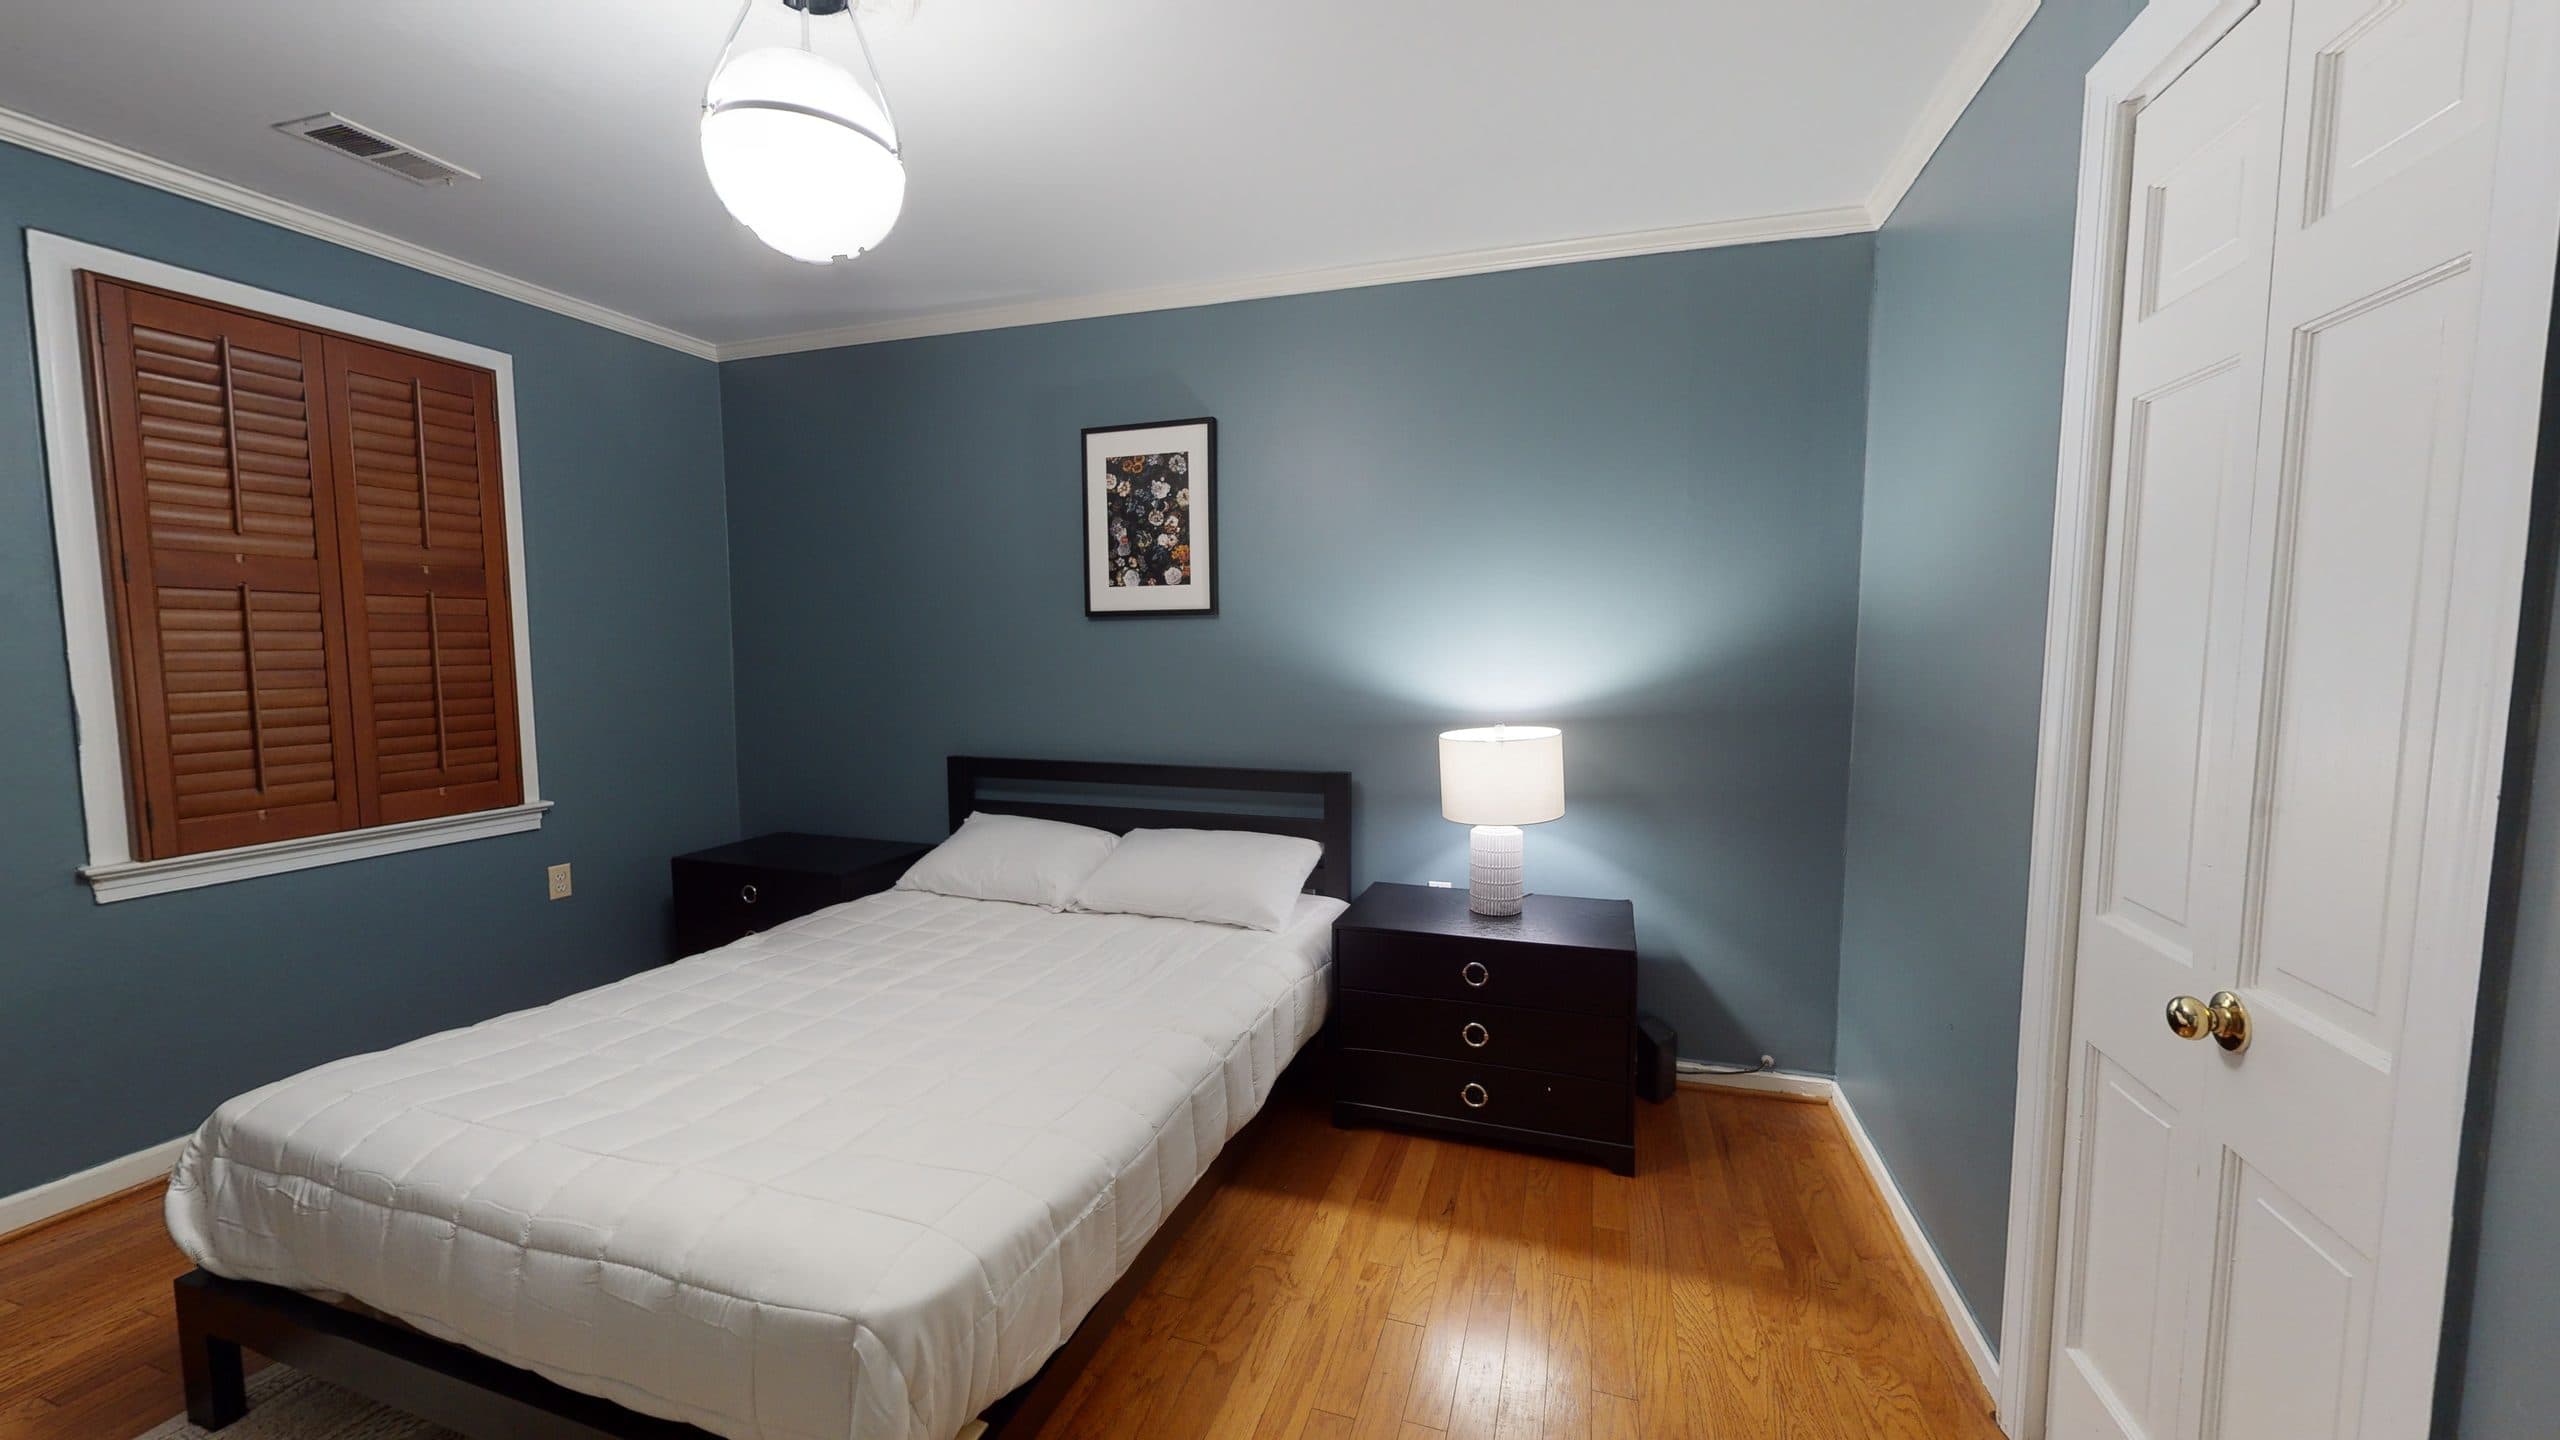 Photo 2 of #1430: Queen Bedroom 1A at June Homes